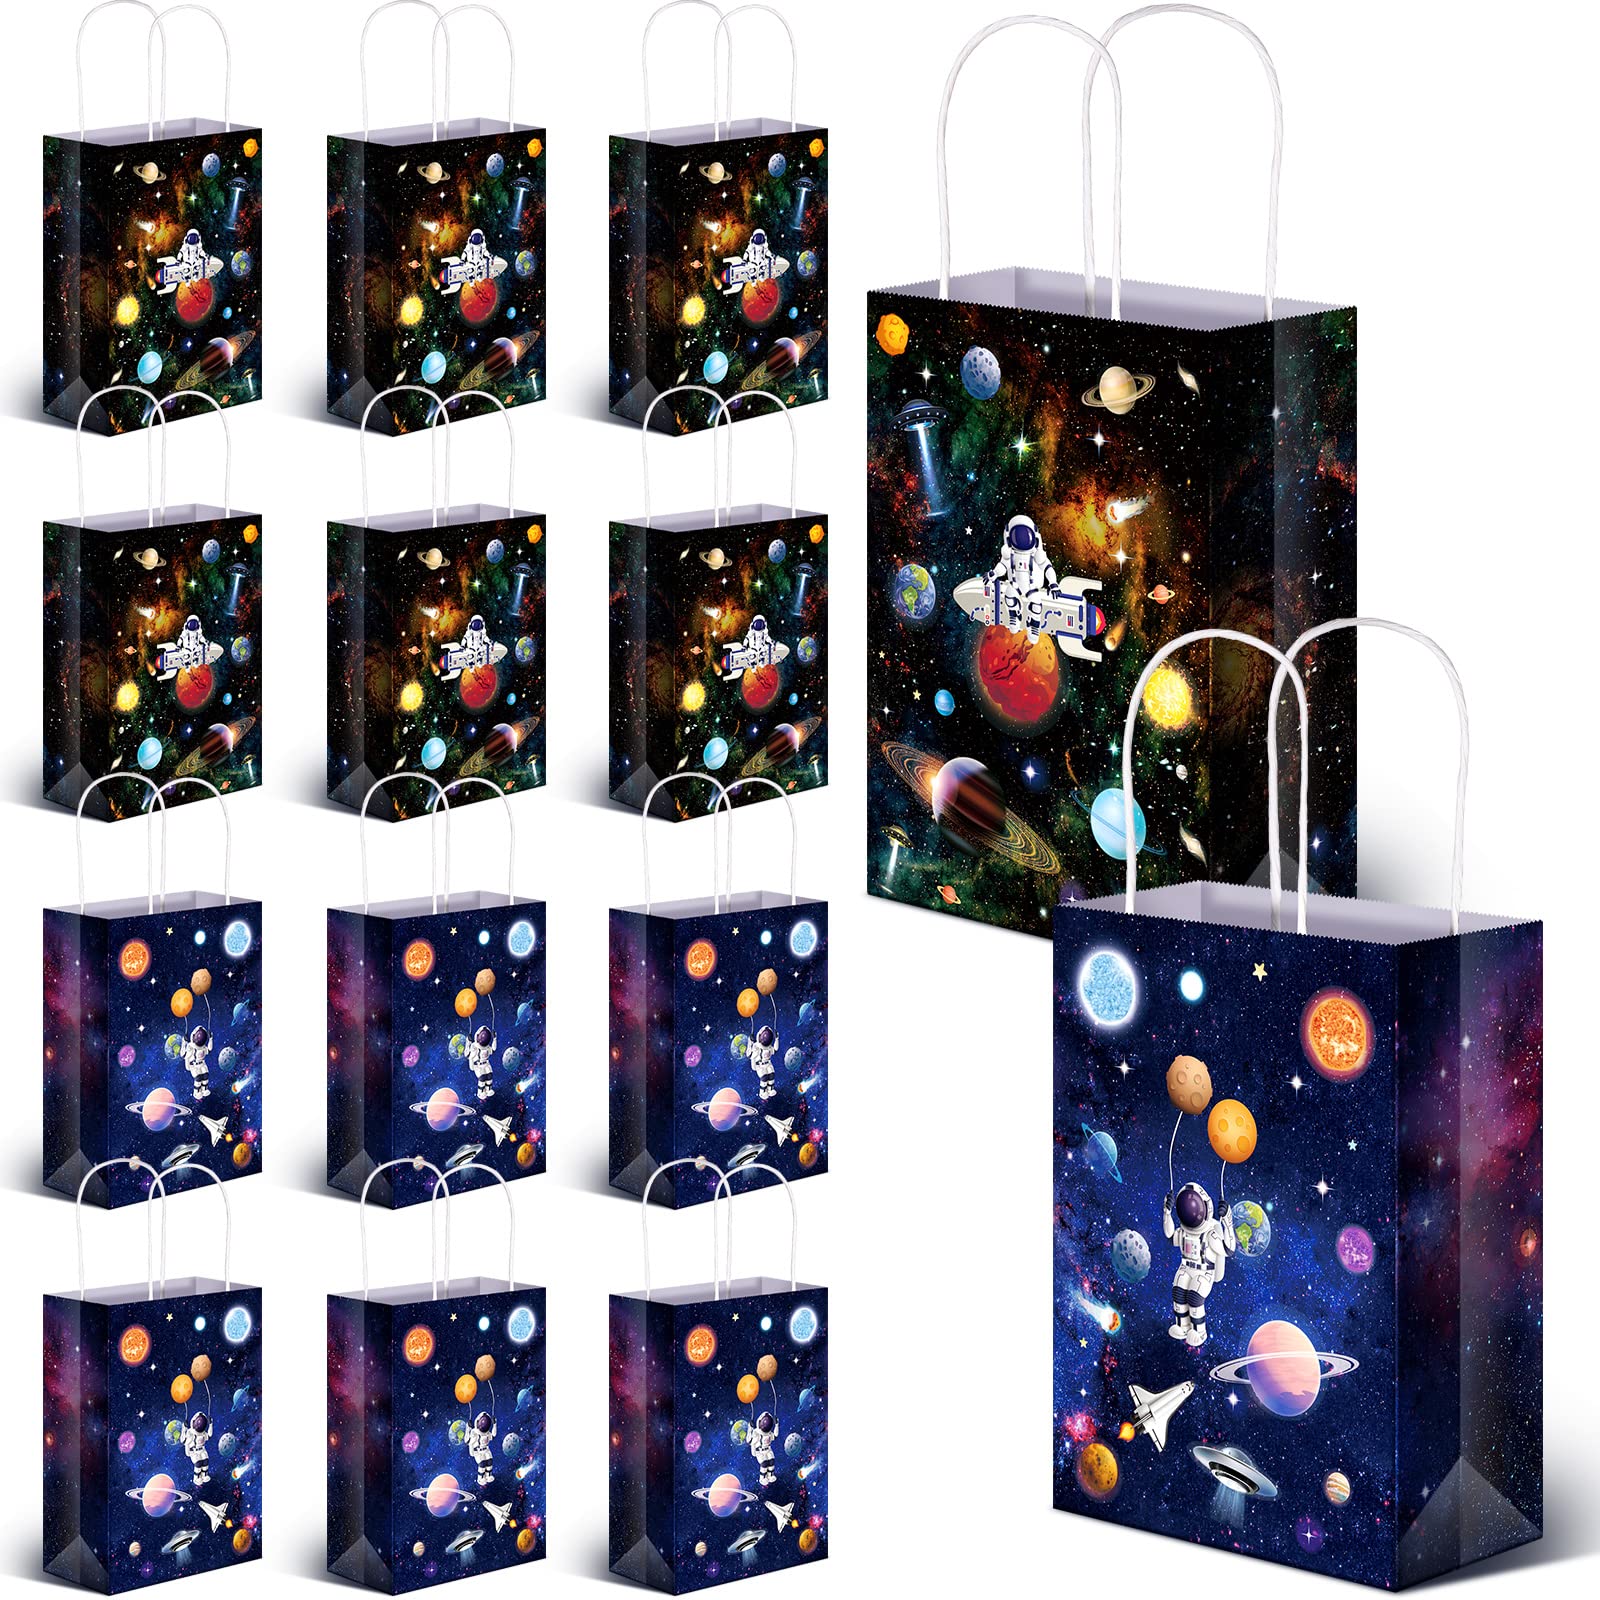 Nezyo 24 Pack Outer Space Present Bags Space Party Favors Planet Candy Goodie Bag Galaxy Gift Bags For Kids Boys Girls Space The